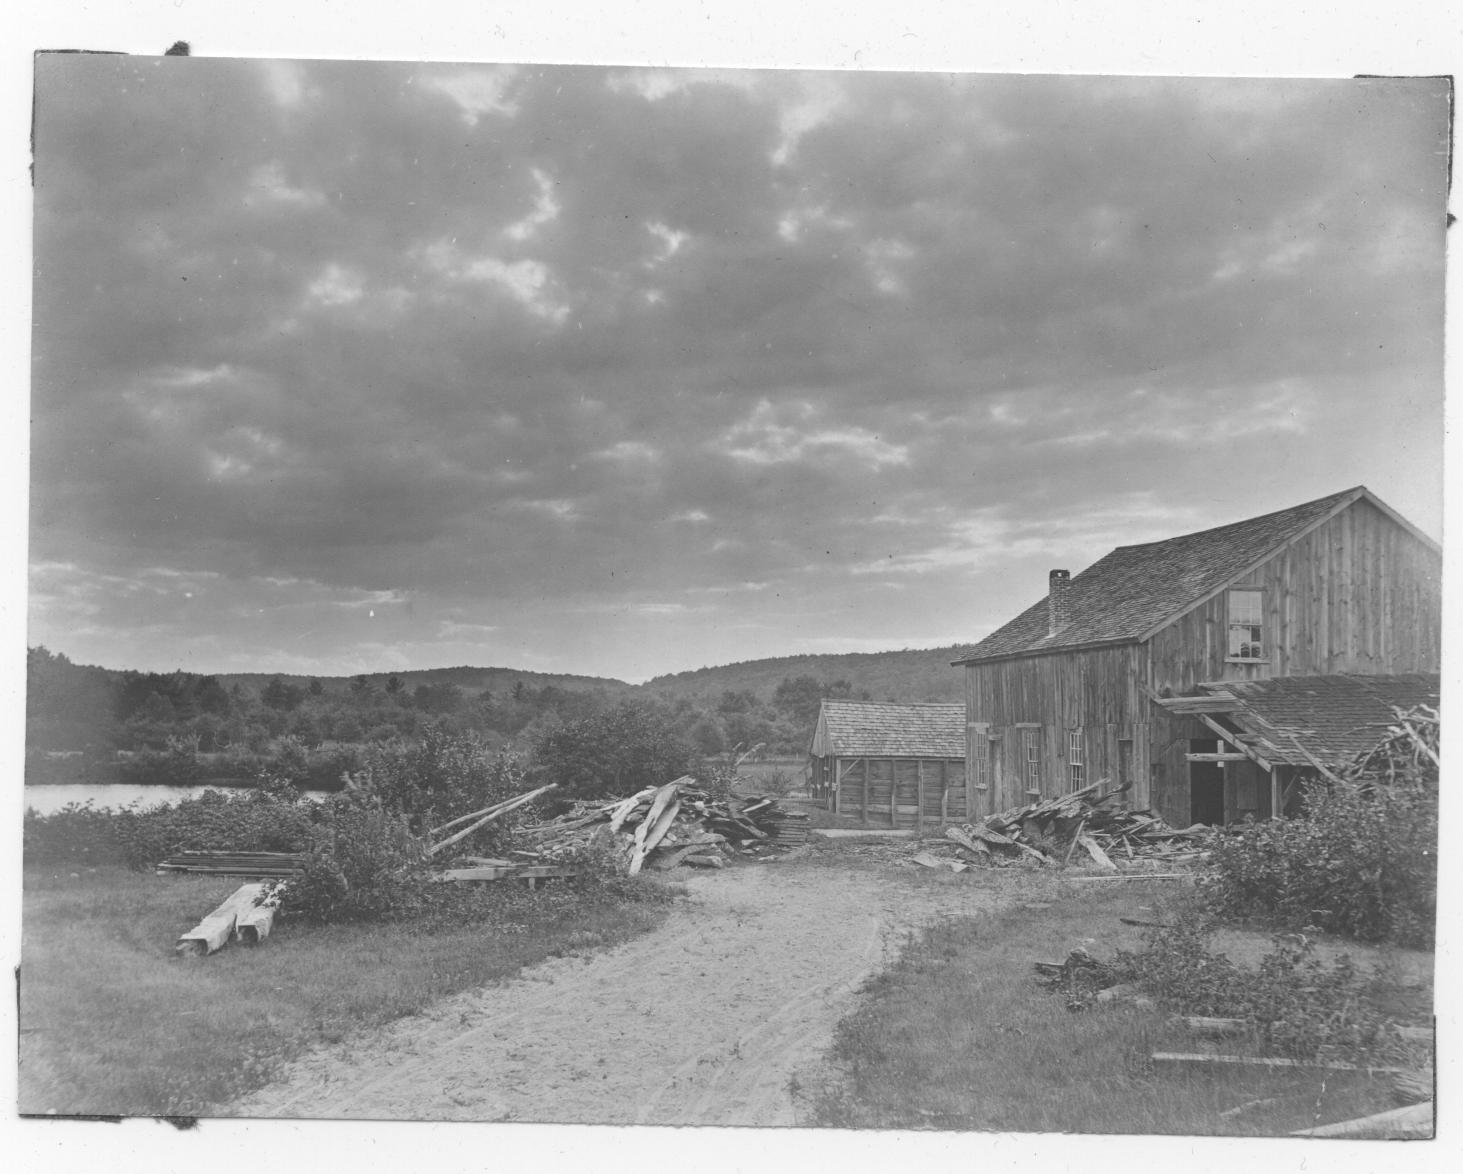 Unknown barn believed to be from Thompson CT. Any information on the location or history of this barn wanted by the Thompson Historical Society